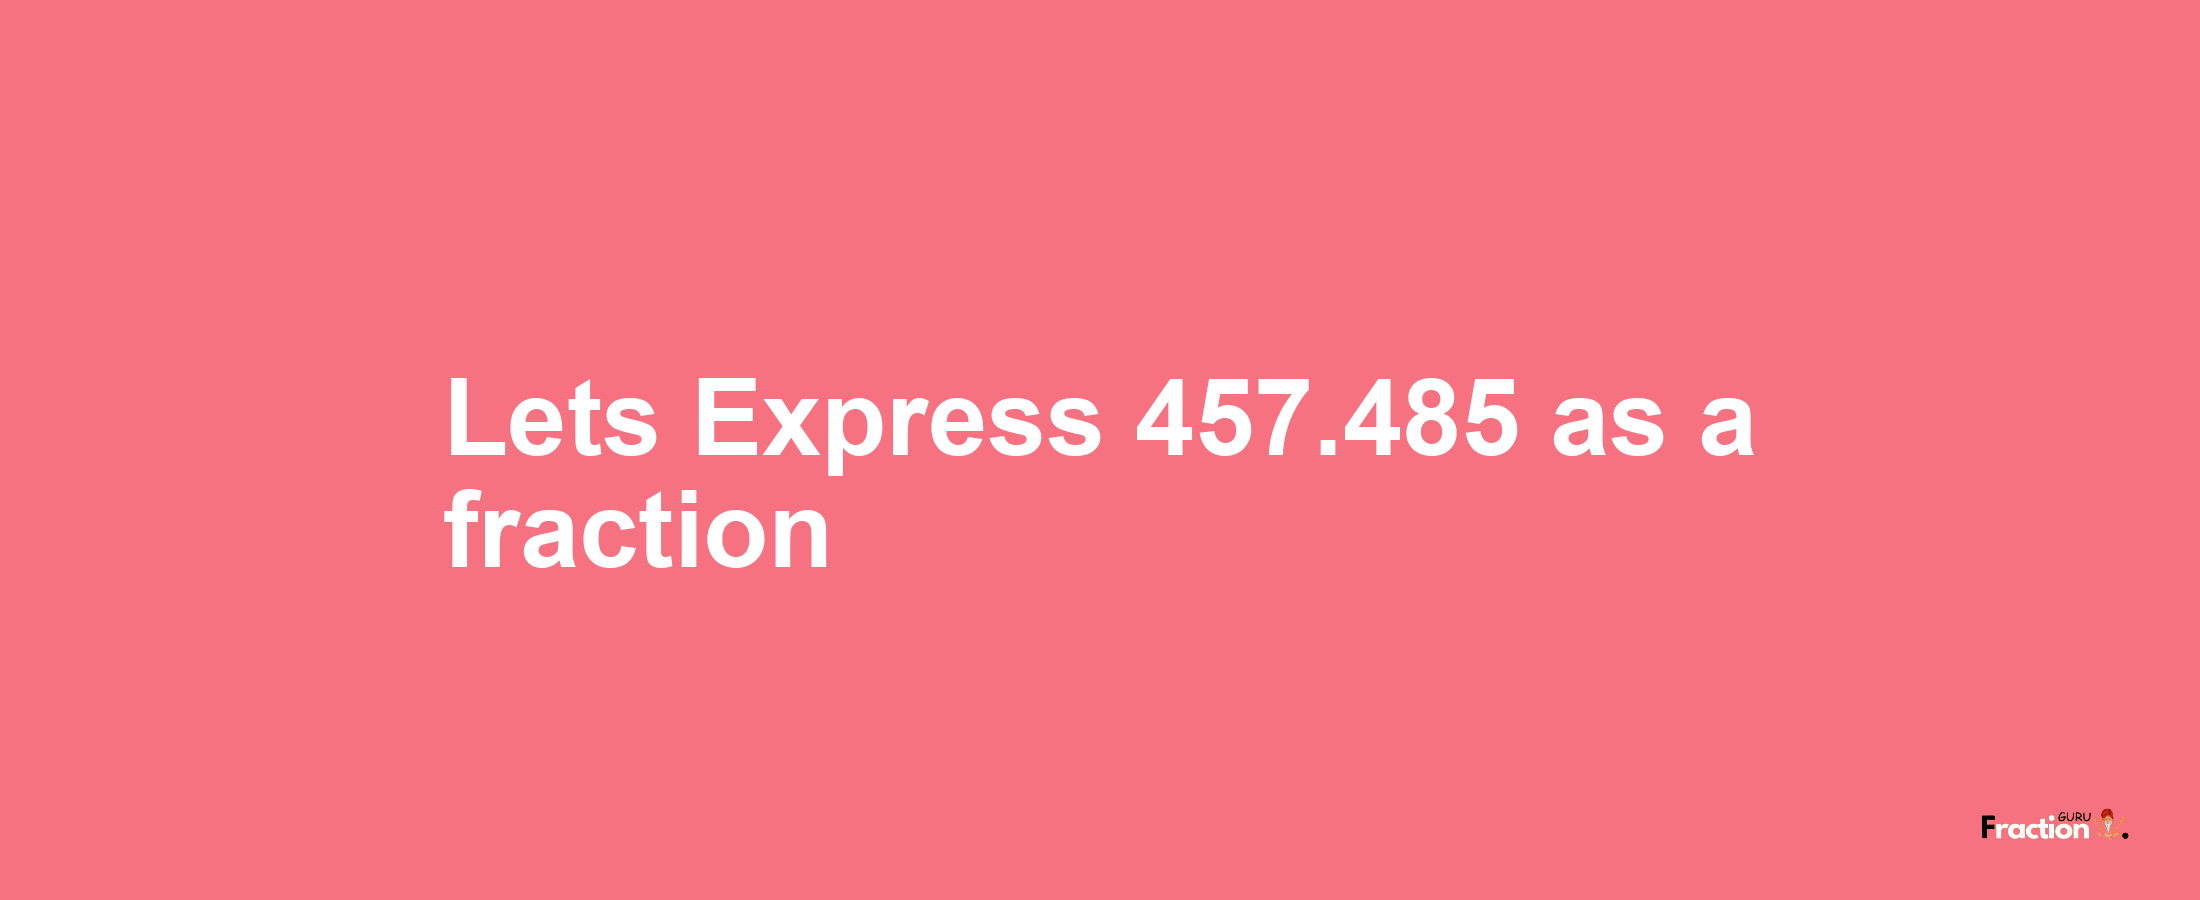 Lets Express 457.485 as afraction